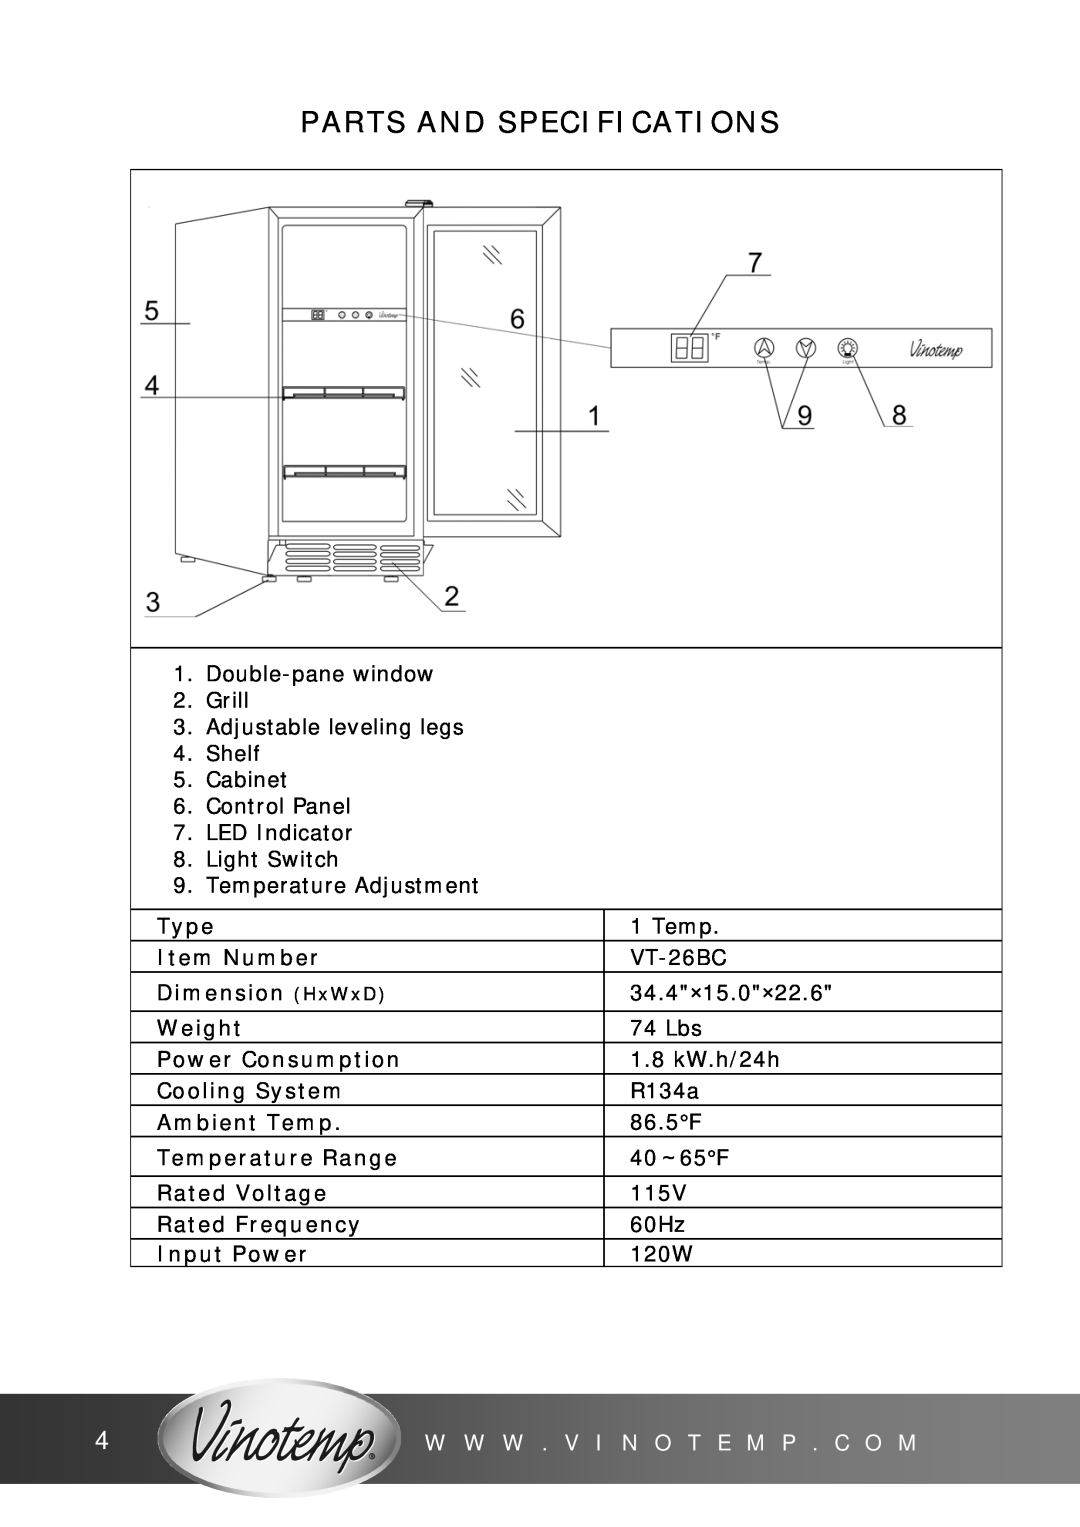 Vinotemp VT-26BC owner manual Parts And Specifications, Type Item Number Dimension HxWxD Weight Power Consumption 